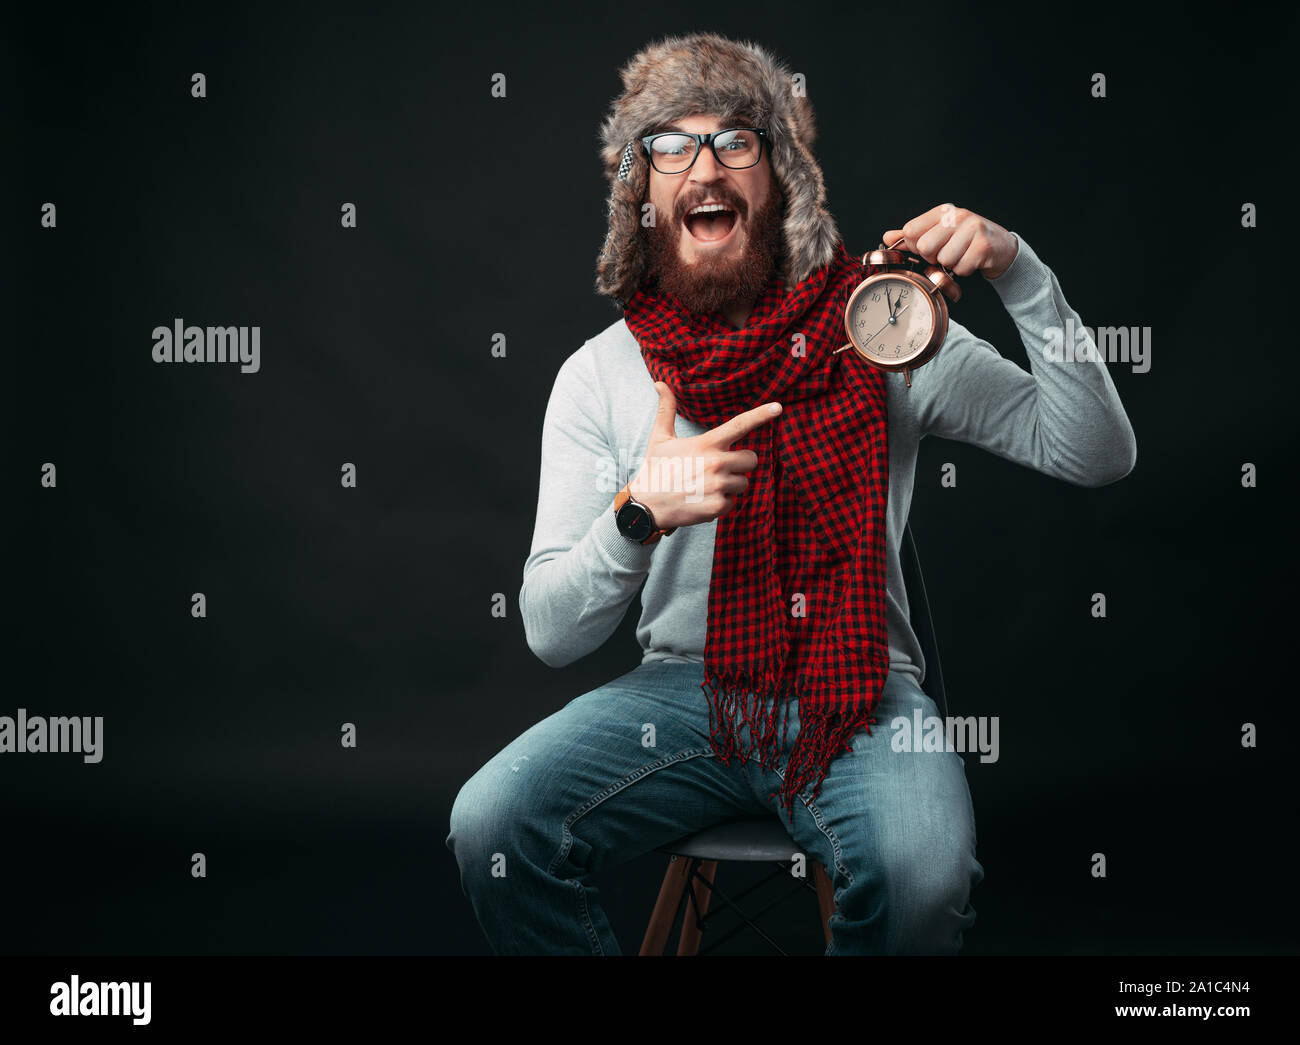 Portrait of amazed man with beard pointing at alarm clock Stock Photo